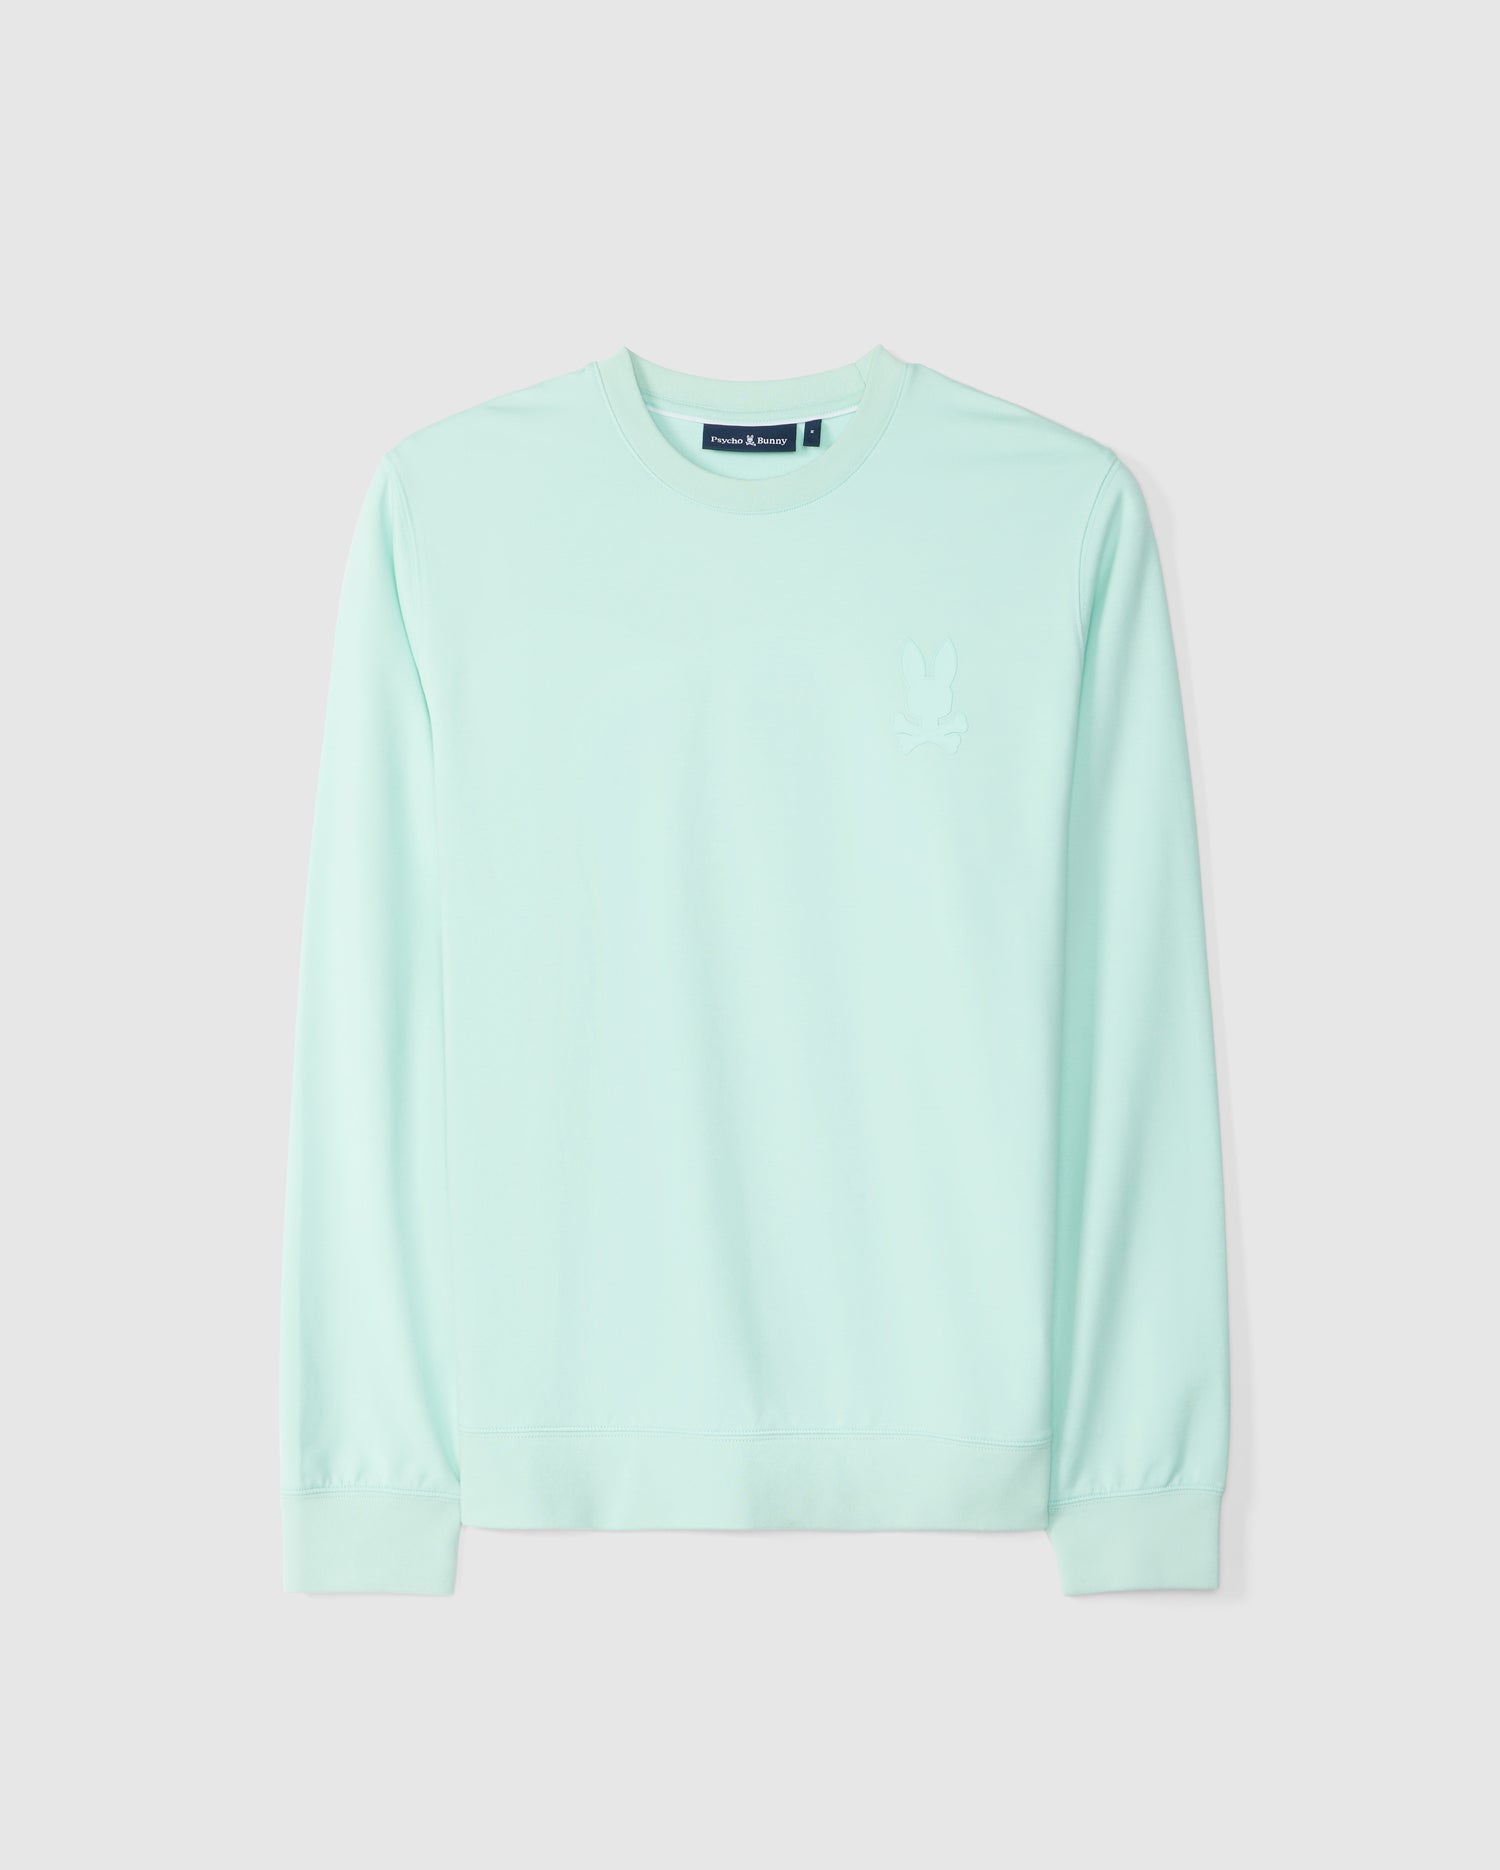 Flat front view of the mens houston french terry crewneck in beachglass 